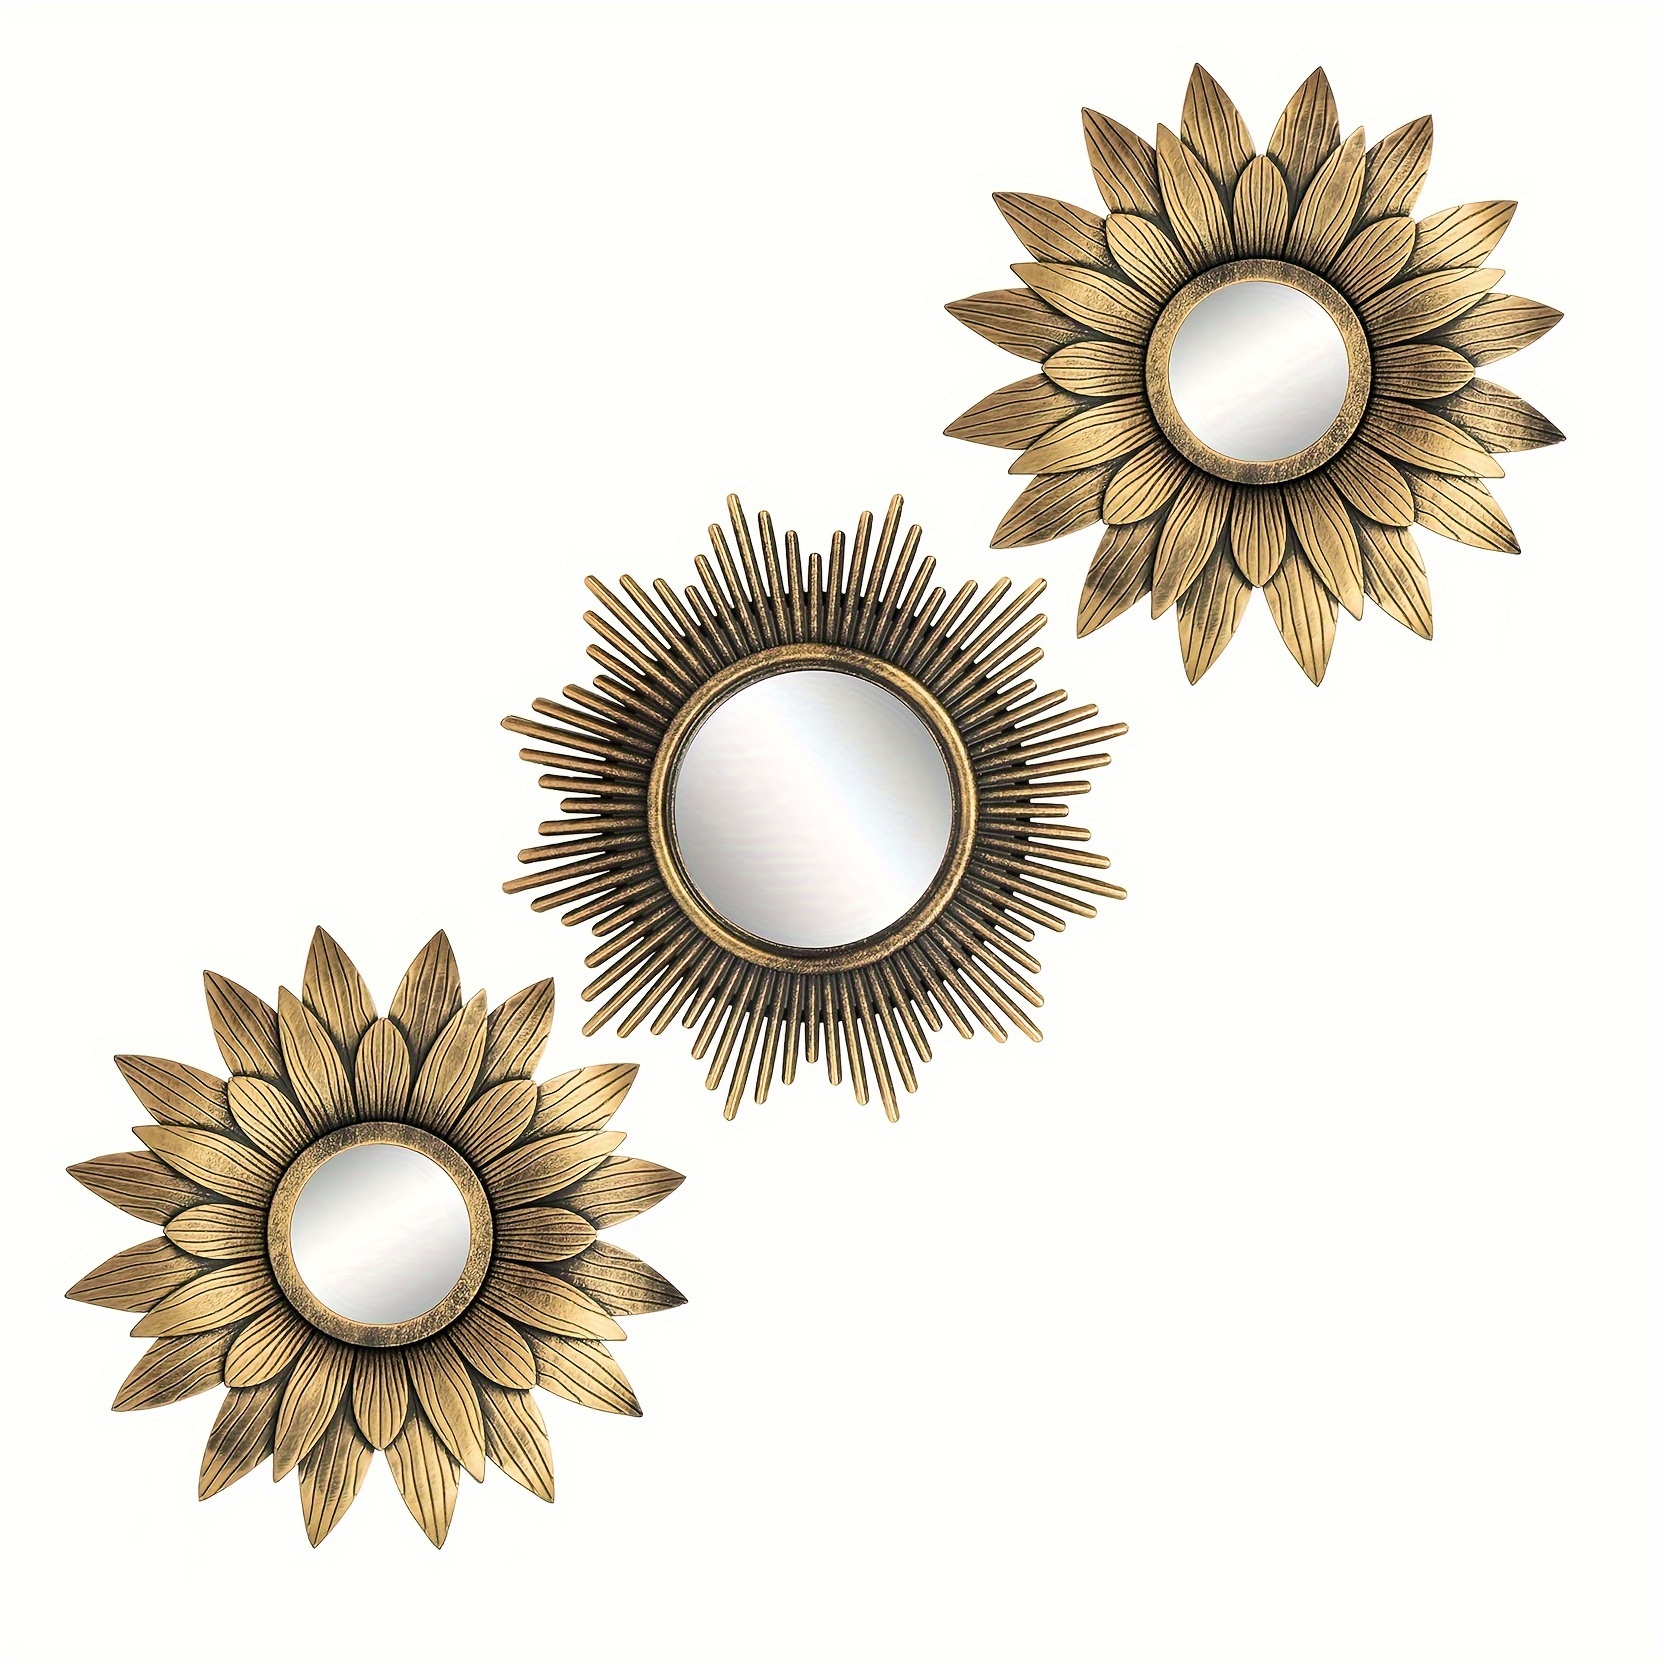 

3pcs/set, Wall Mirrors Decor Plastic Antique Gold Small Mirrors Home Decoration With Wall Mount Hook Offered Vintage Sunburst Flower Decorative For Living Room Bedroom Dinning Room 10 Inch 25cm